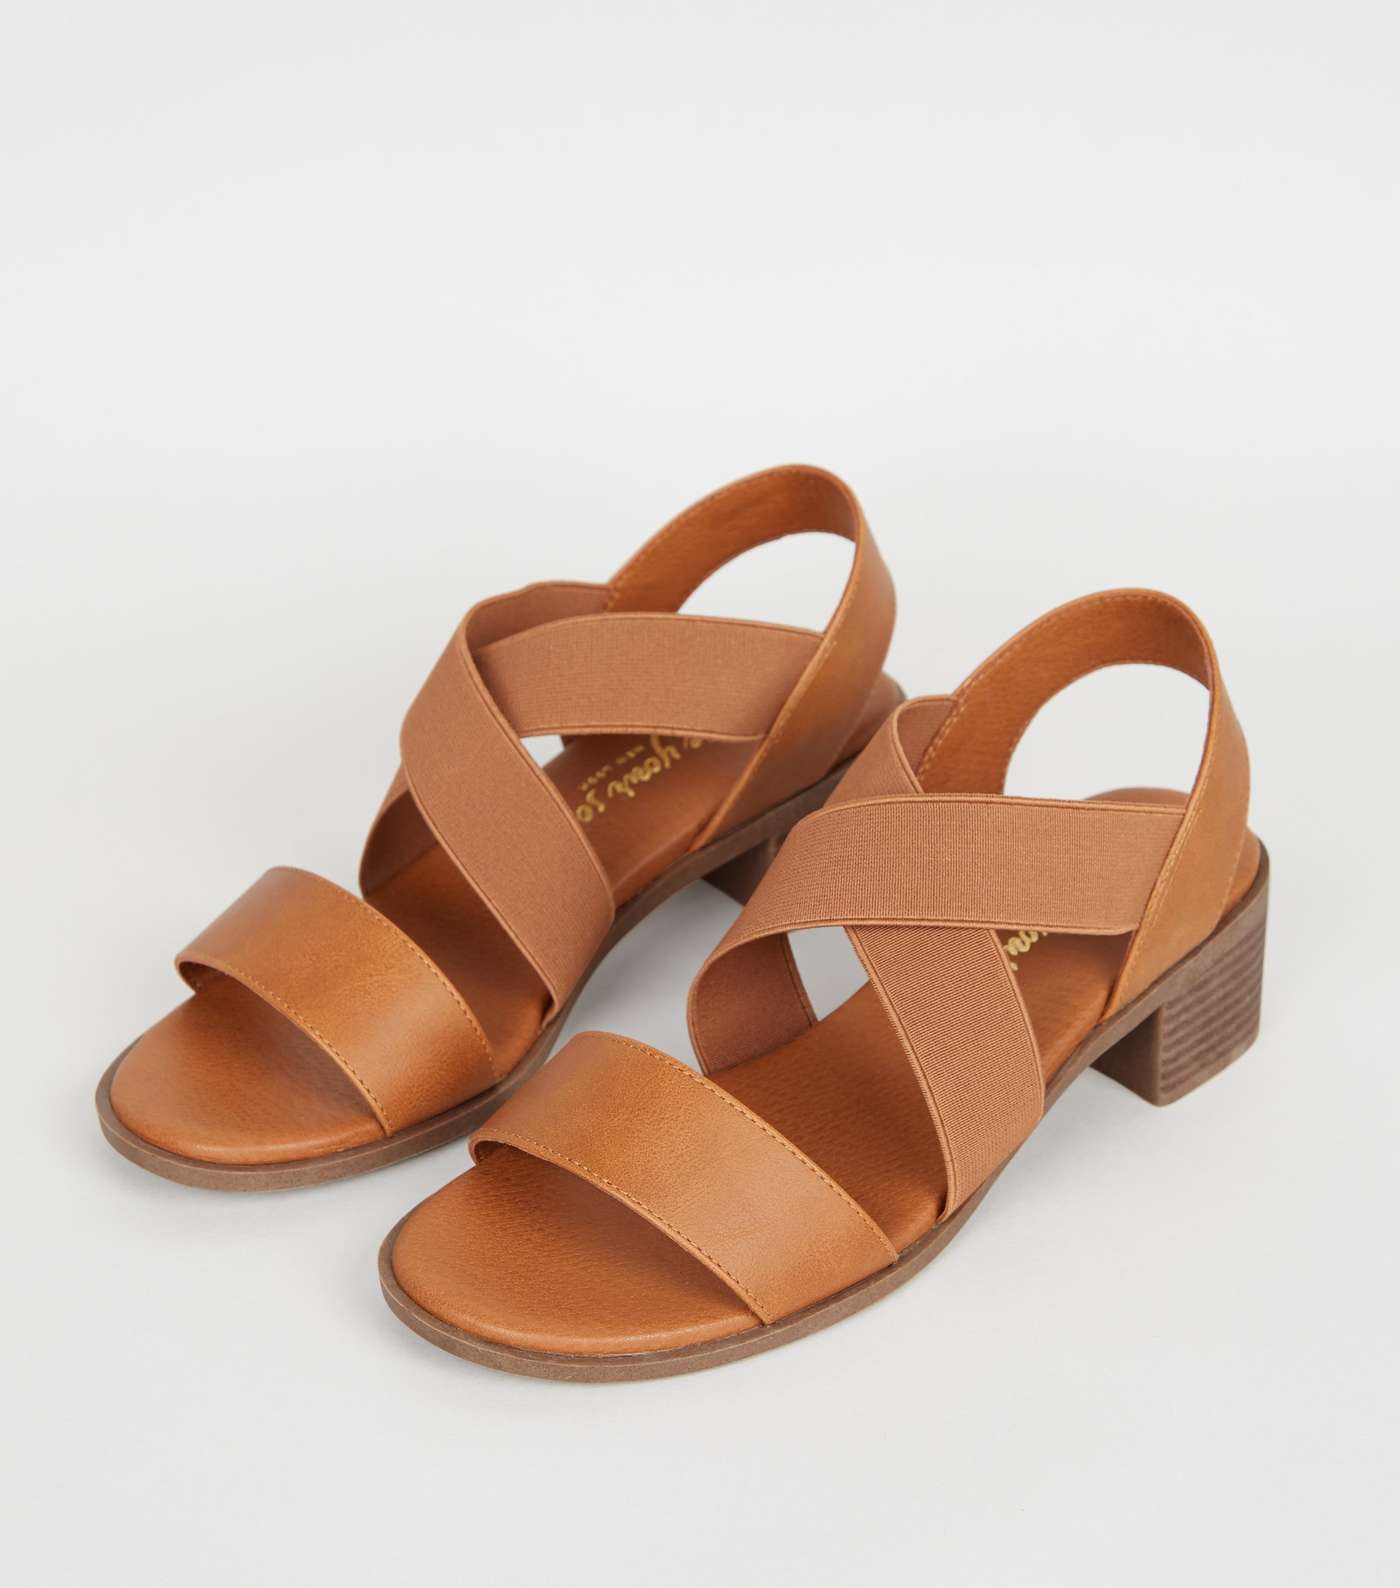 Wide Fit Tan Elastic Strappy Low Heel Sandals Image 3